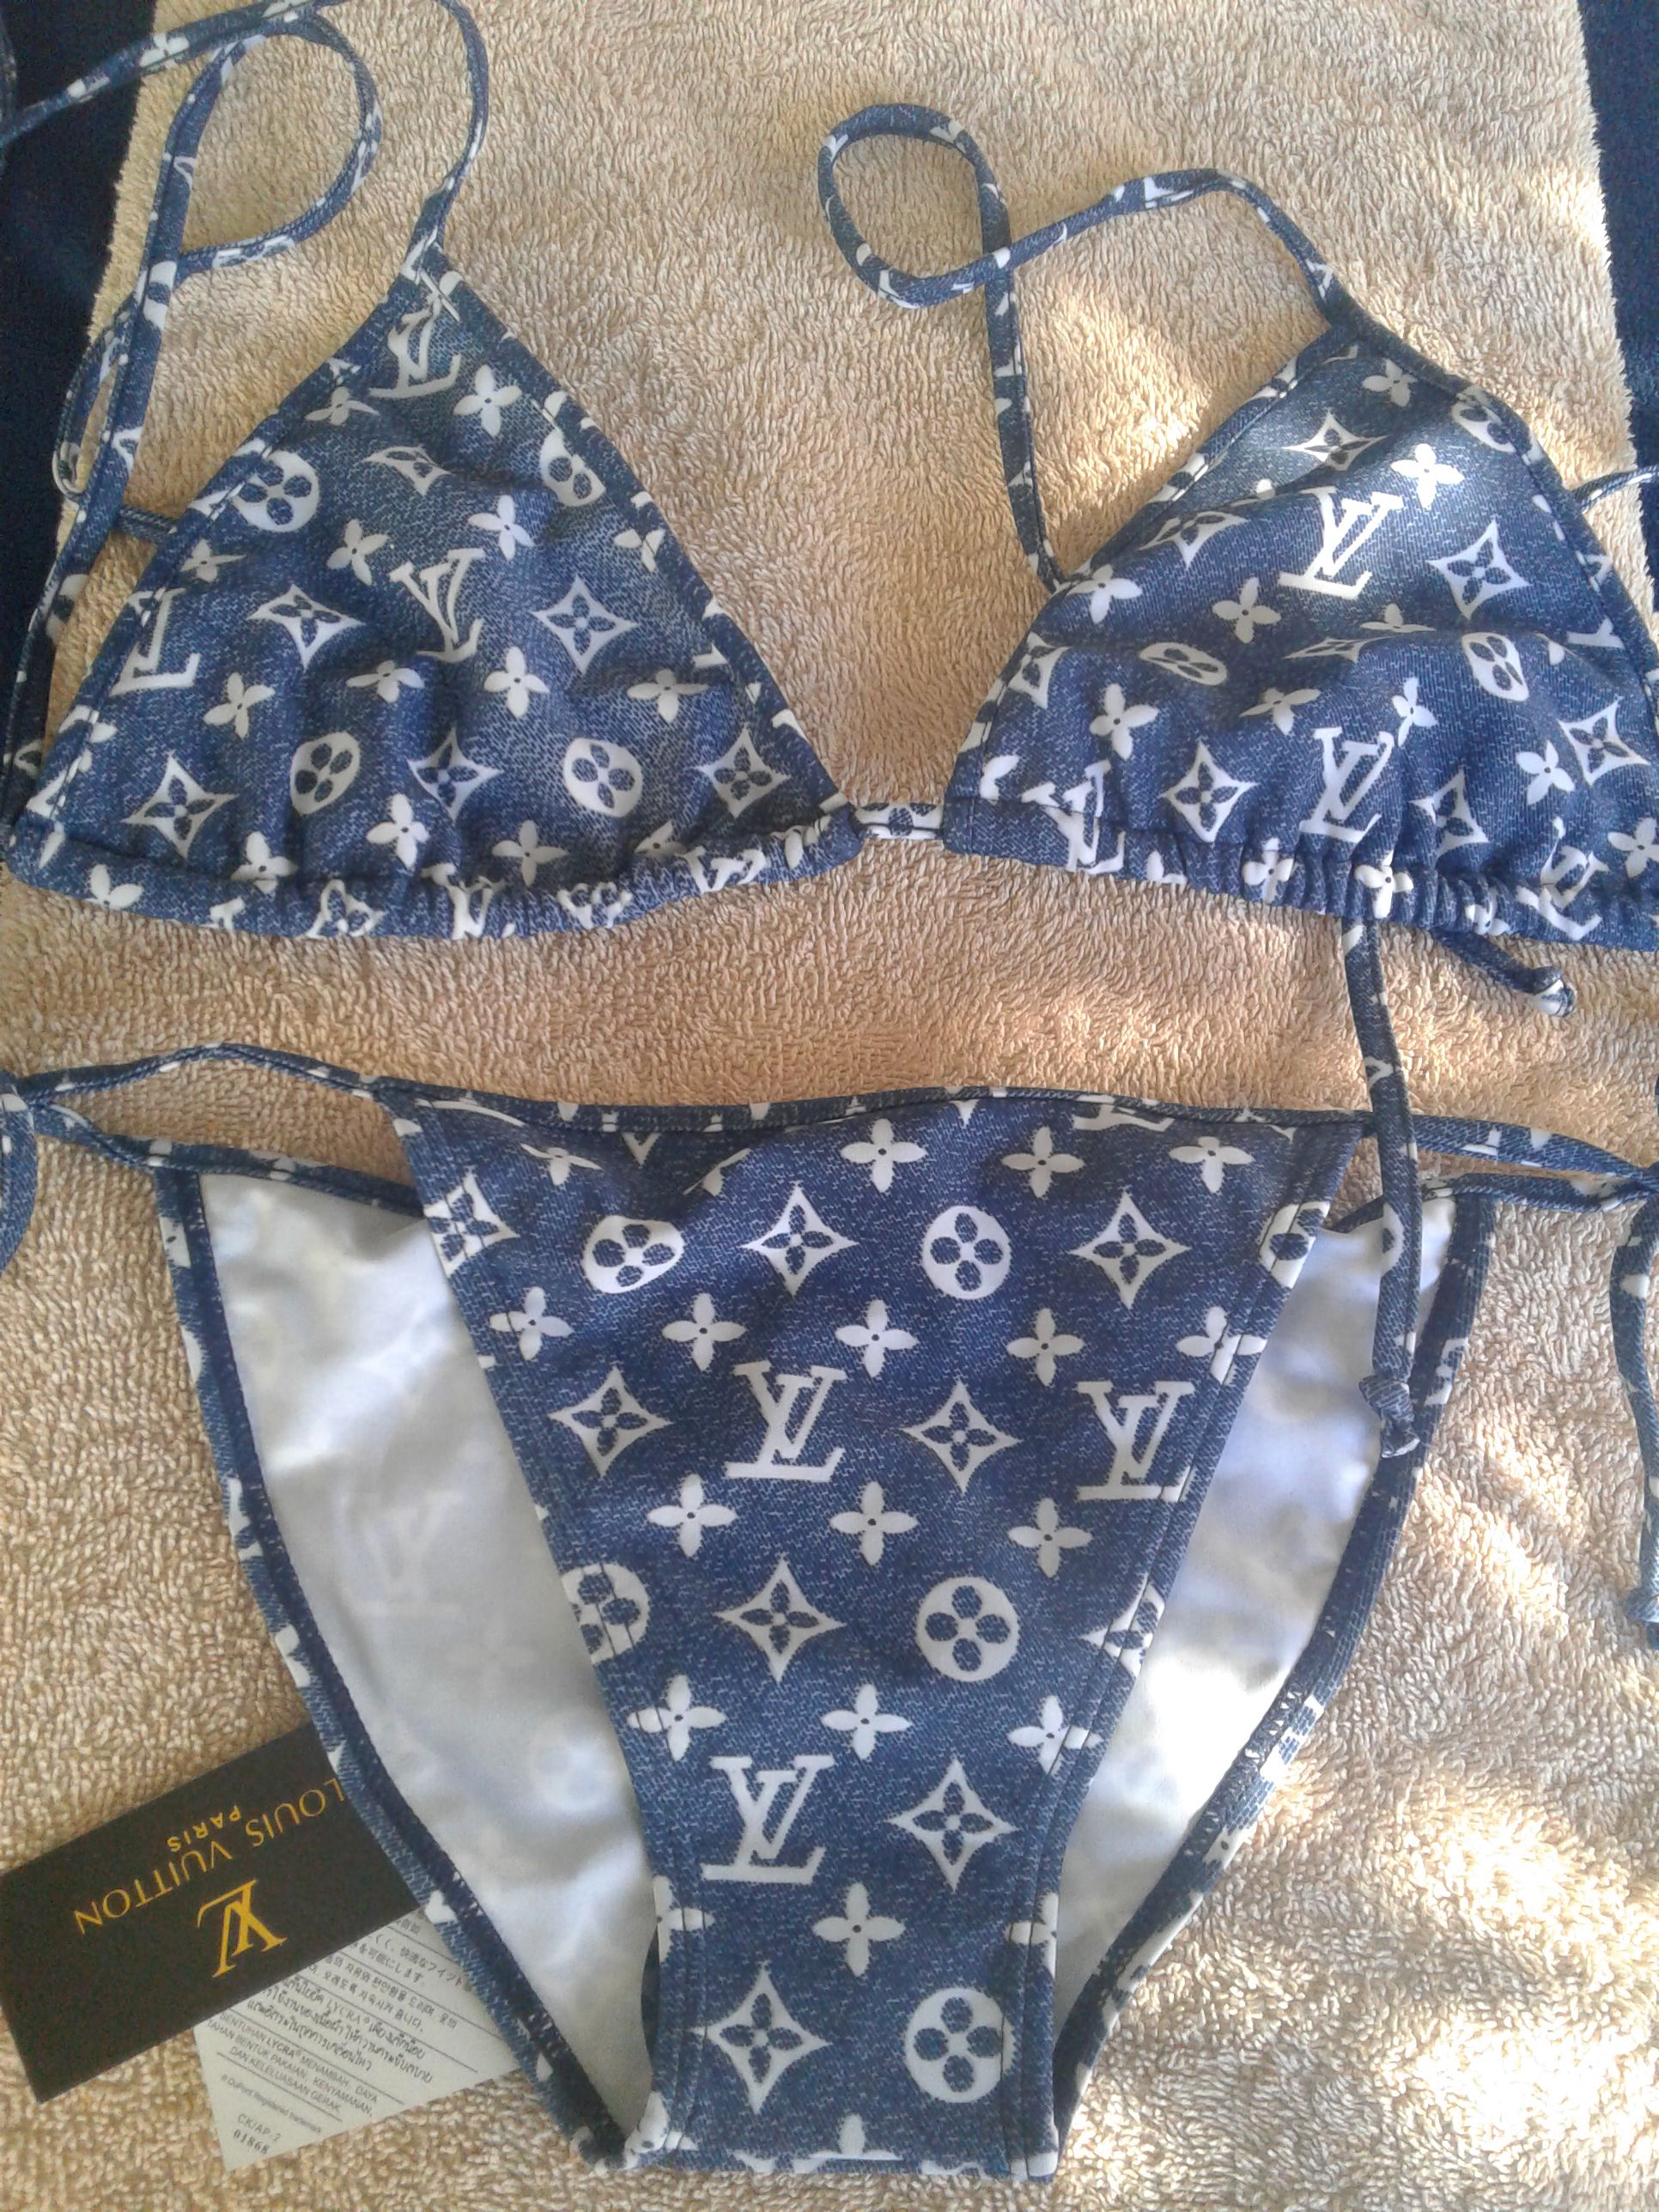 LV BATHING SUIT for Sale in Santa Ana, CA - OfferUp